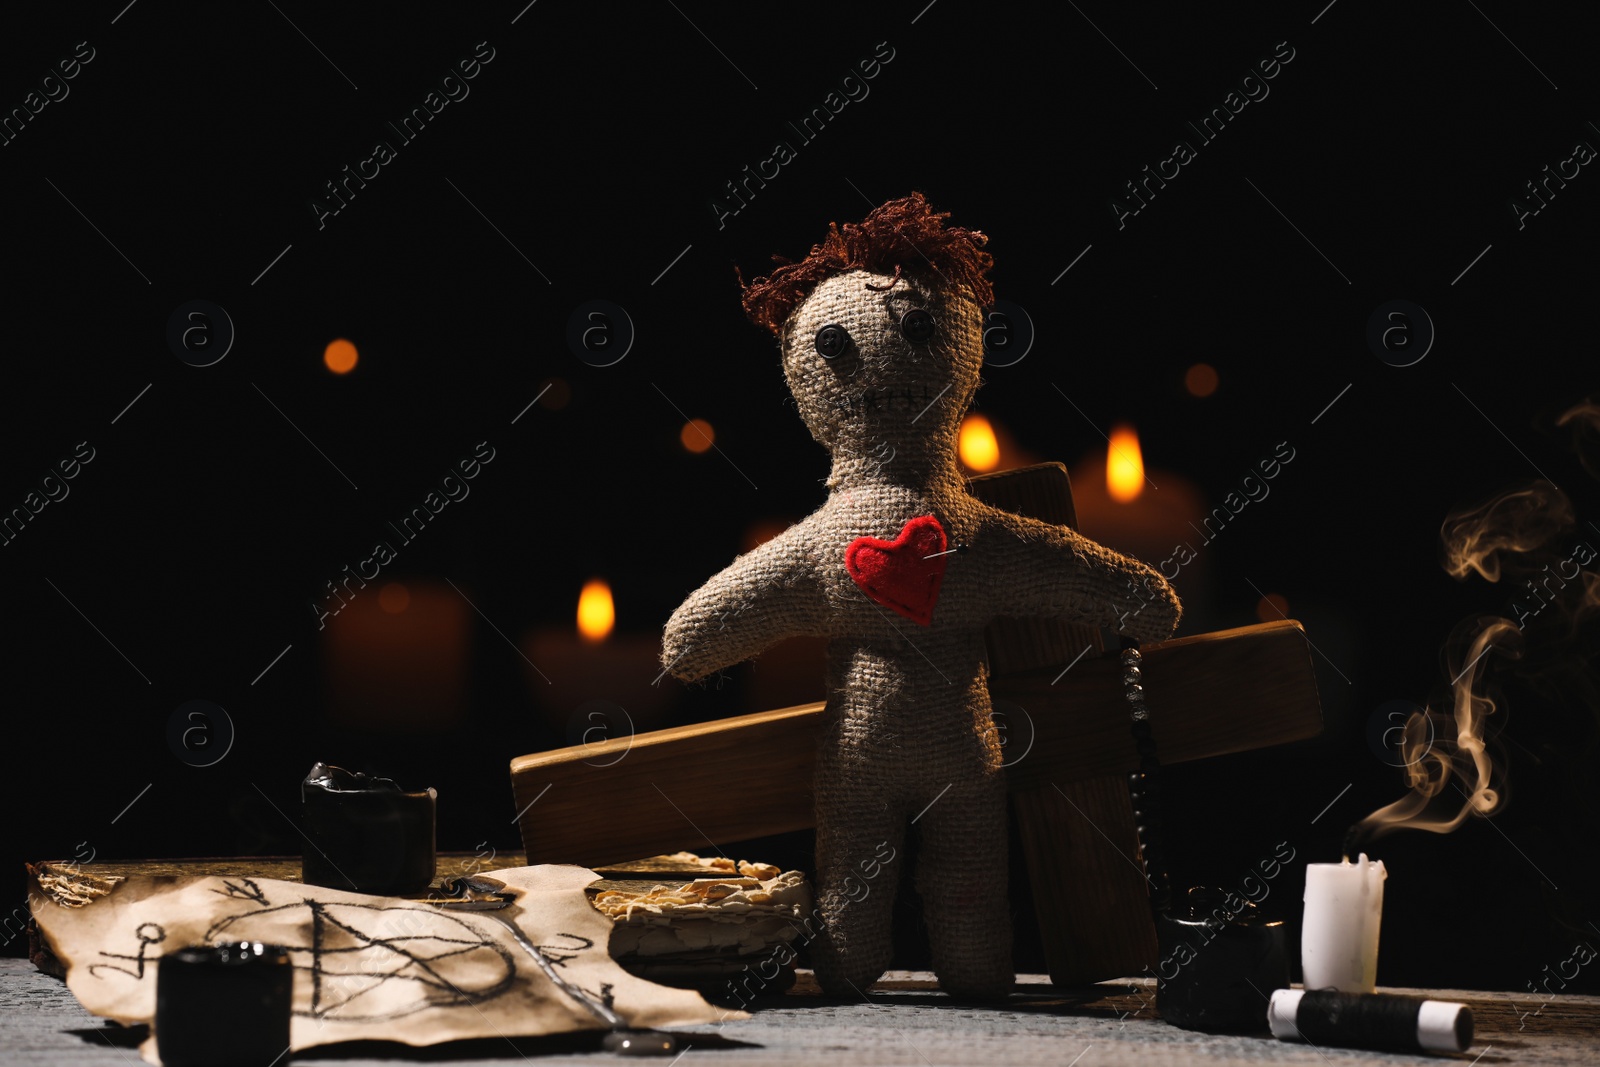 Photo of Voodoo doll with pin in heart and ceremonial items on wooden table against blurred background